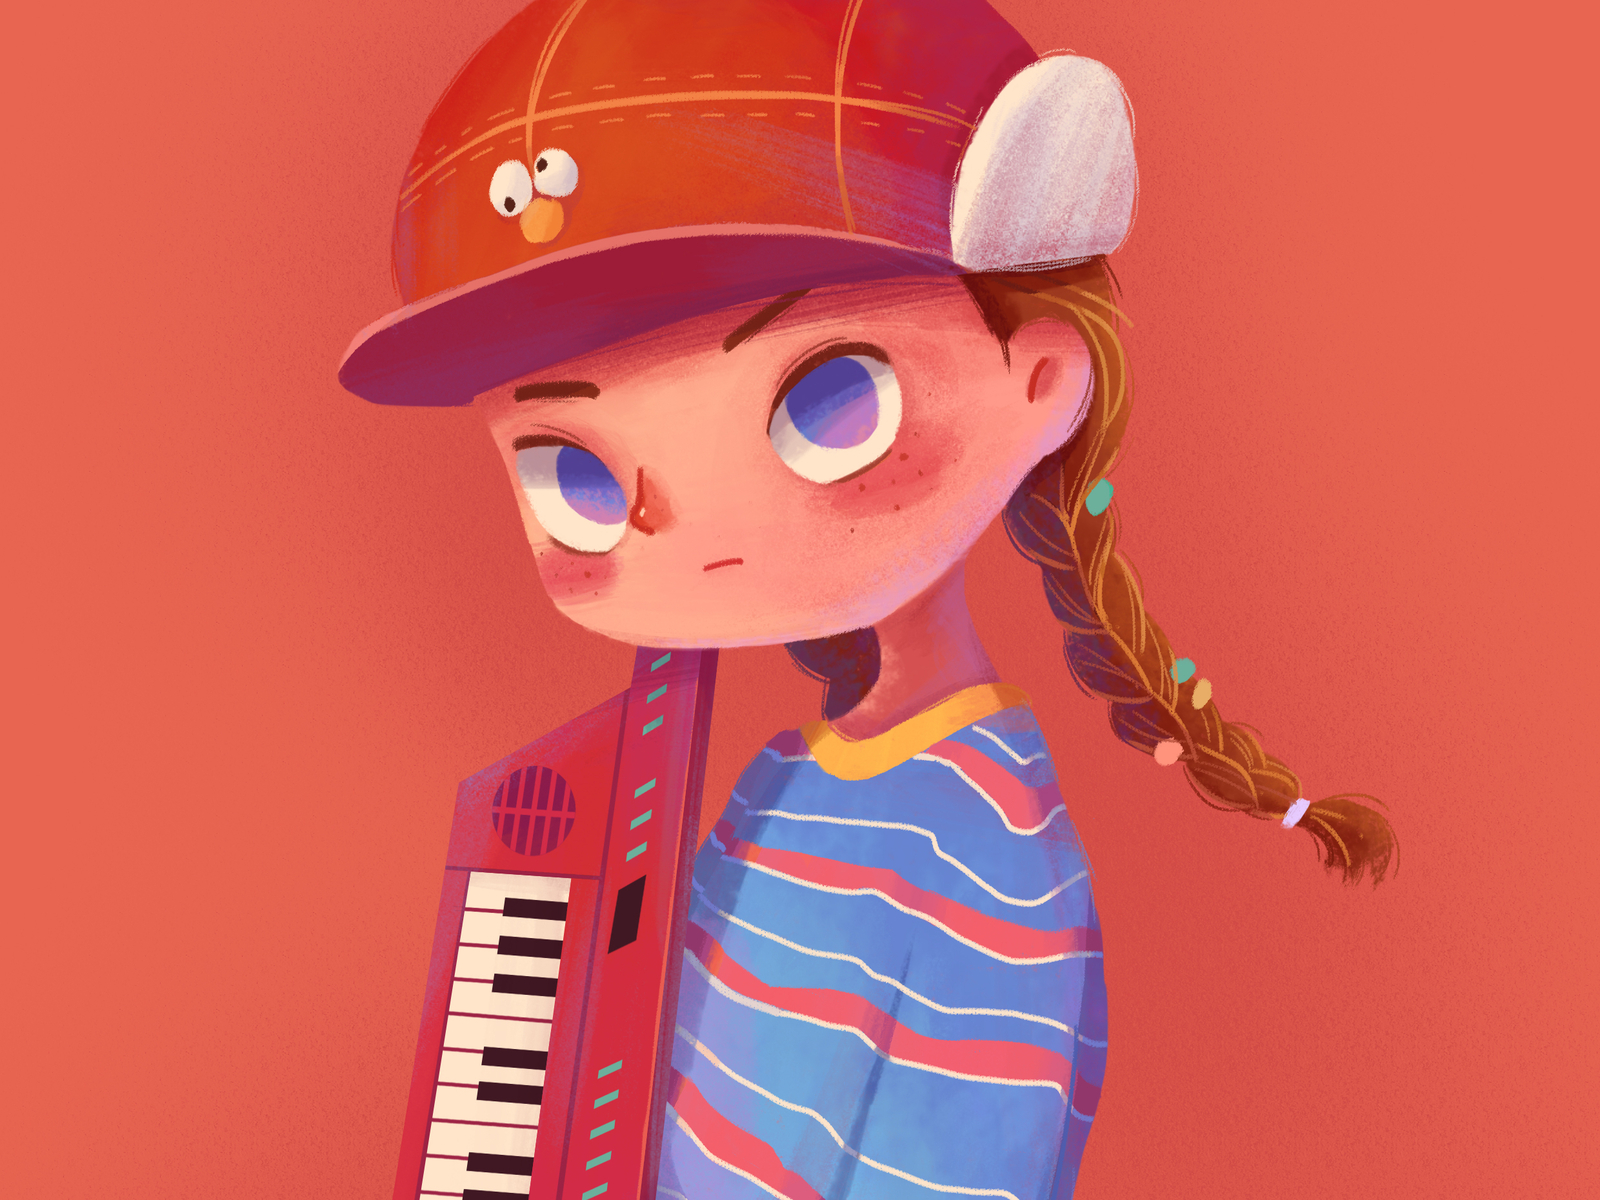 character design-03 by Moy Lee on Dribbble